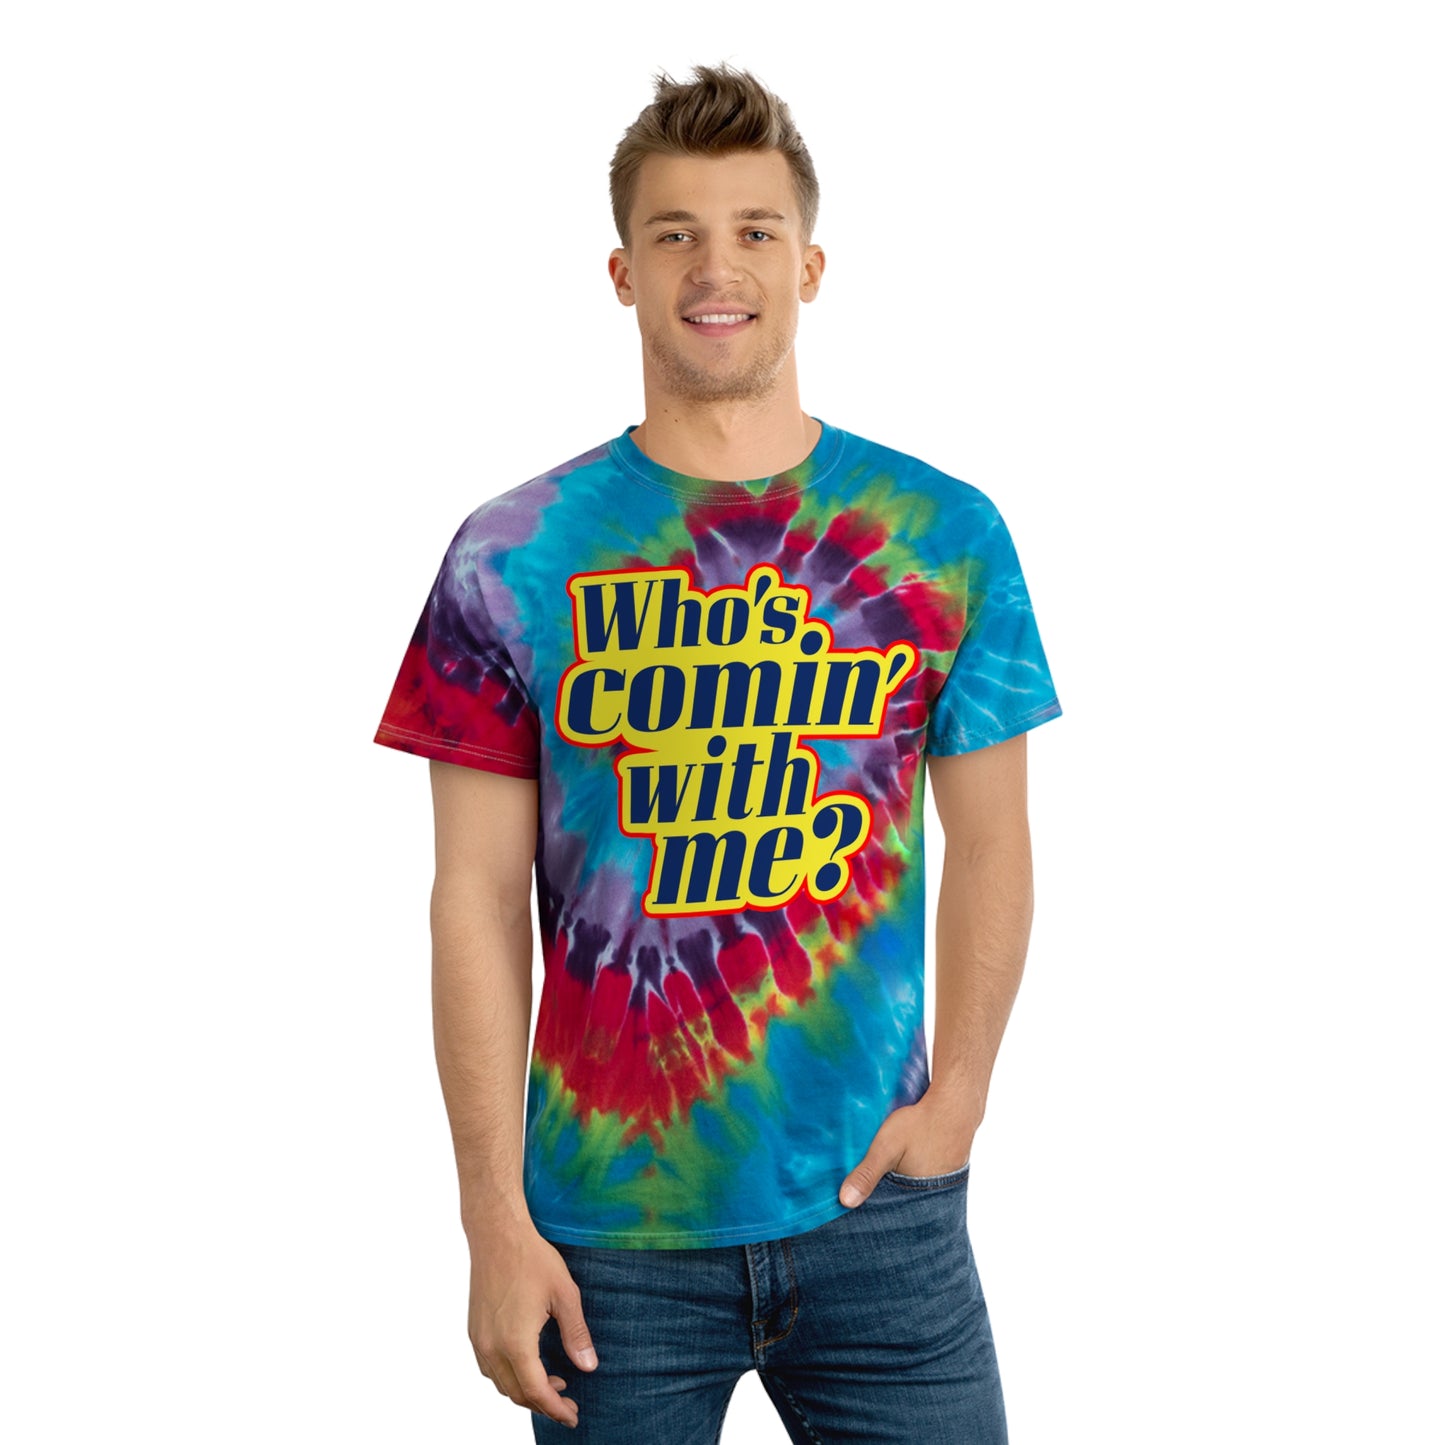 Who's Comin' With me? tie-dye t-shirt